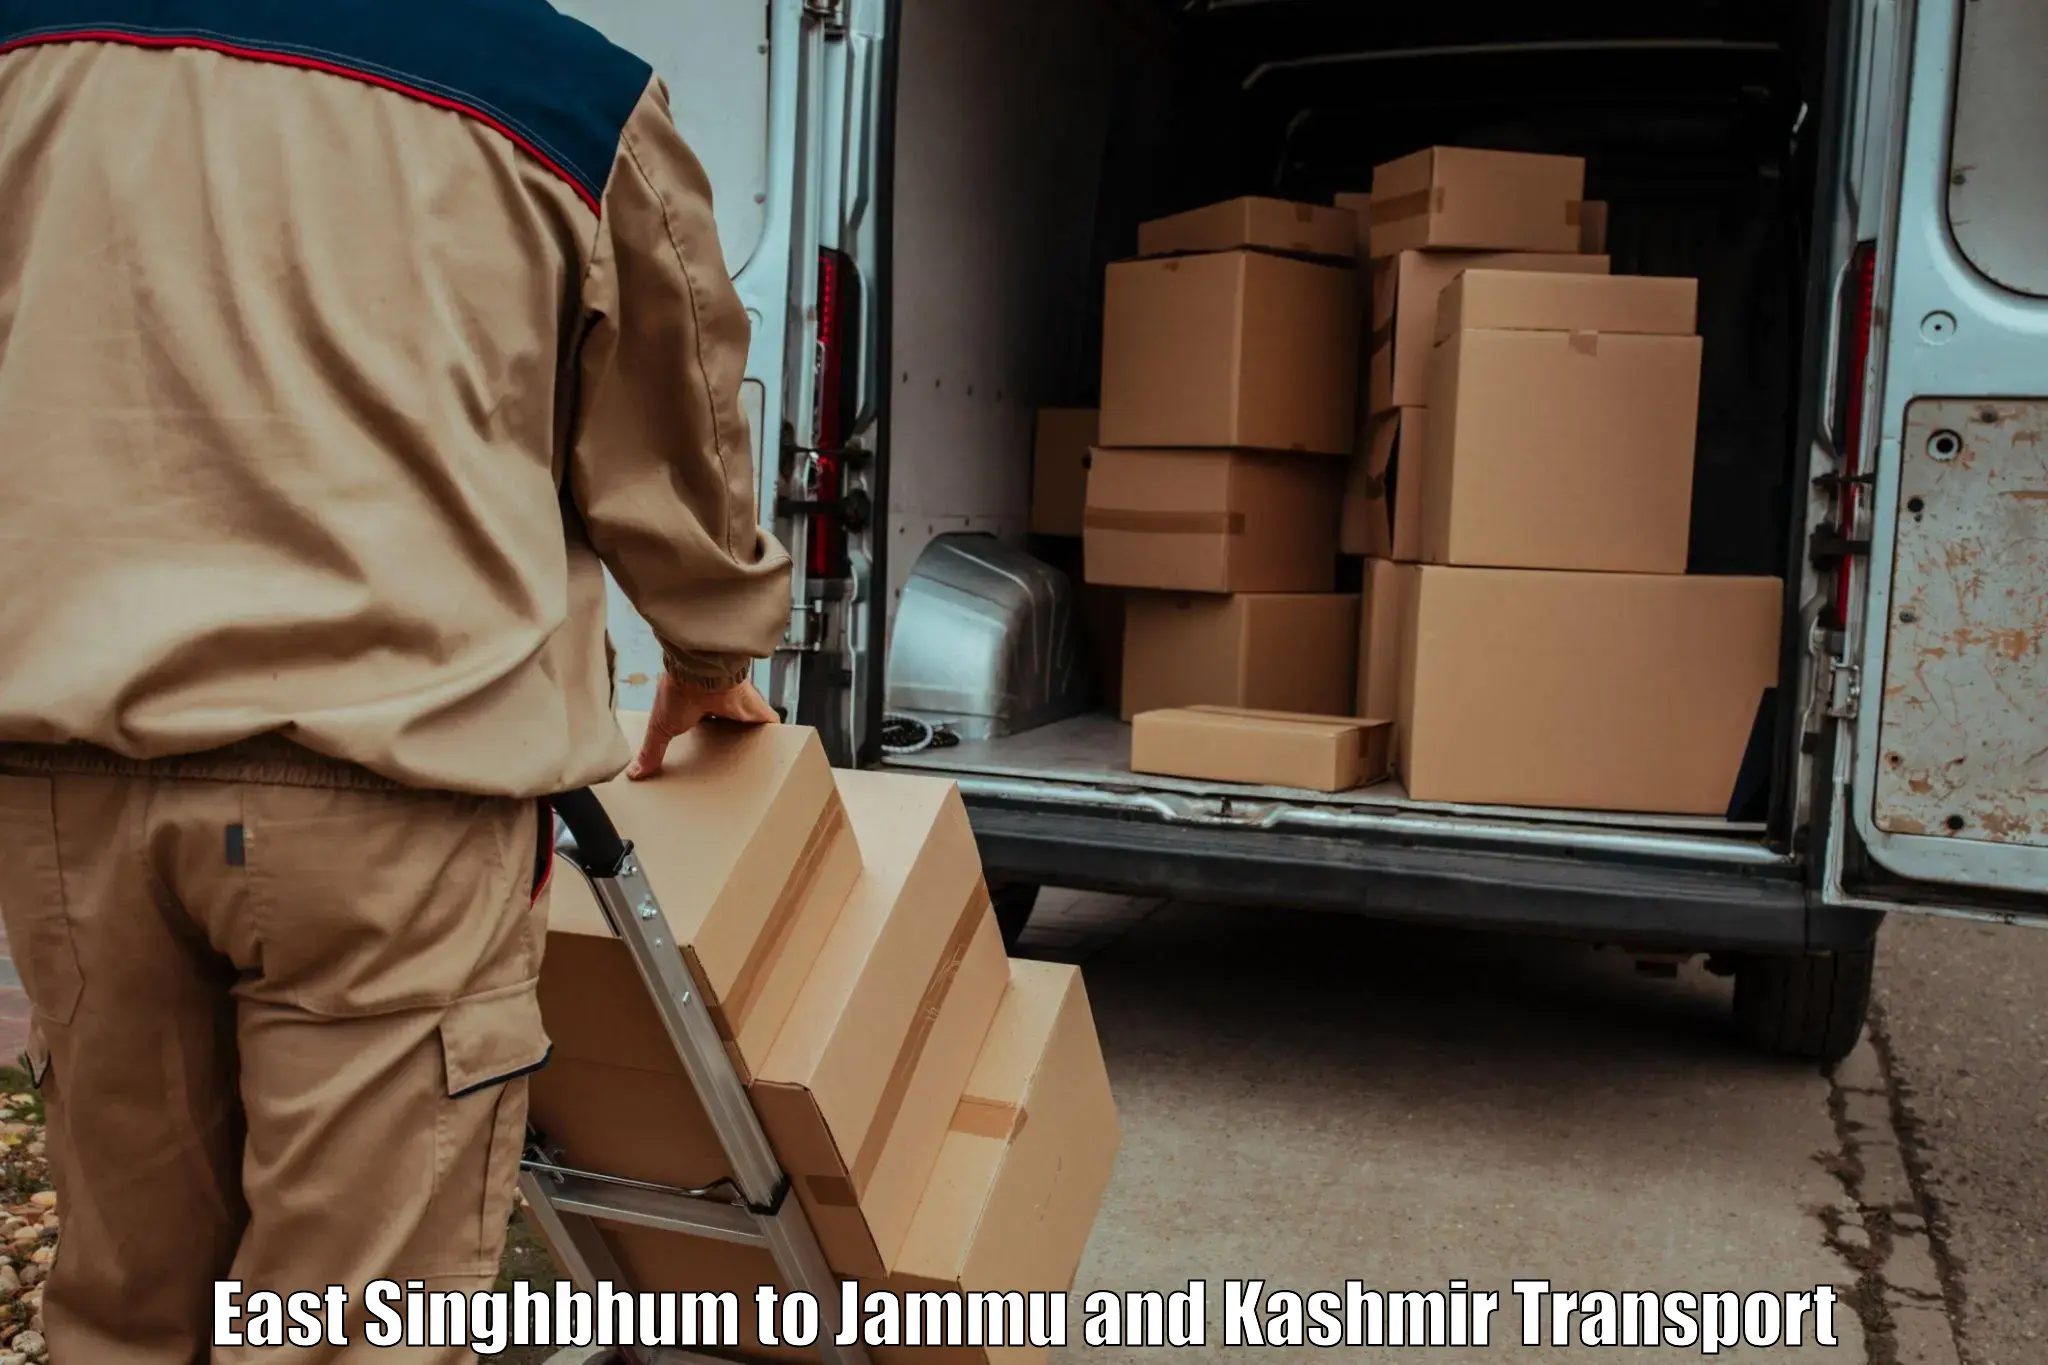 Air freight transport services East Singhbhum to Jammu and Kashmir